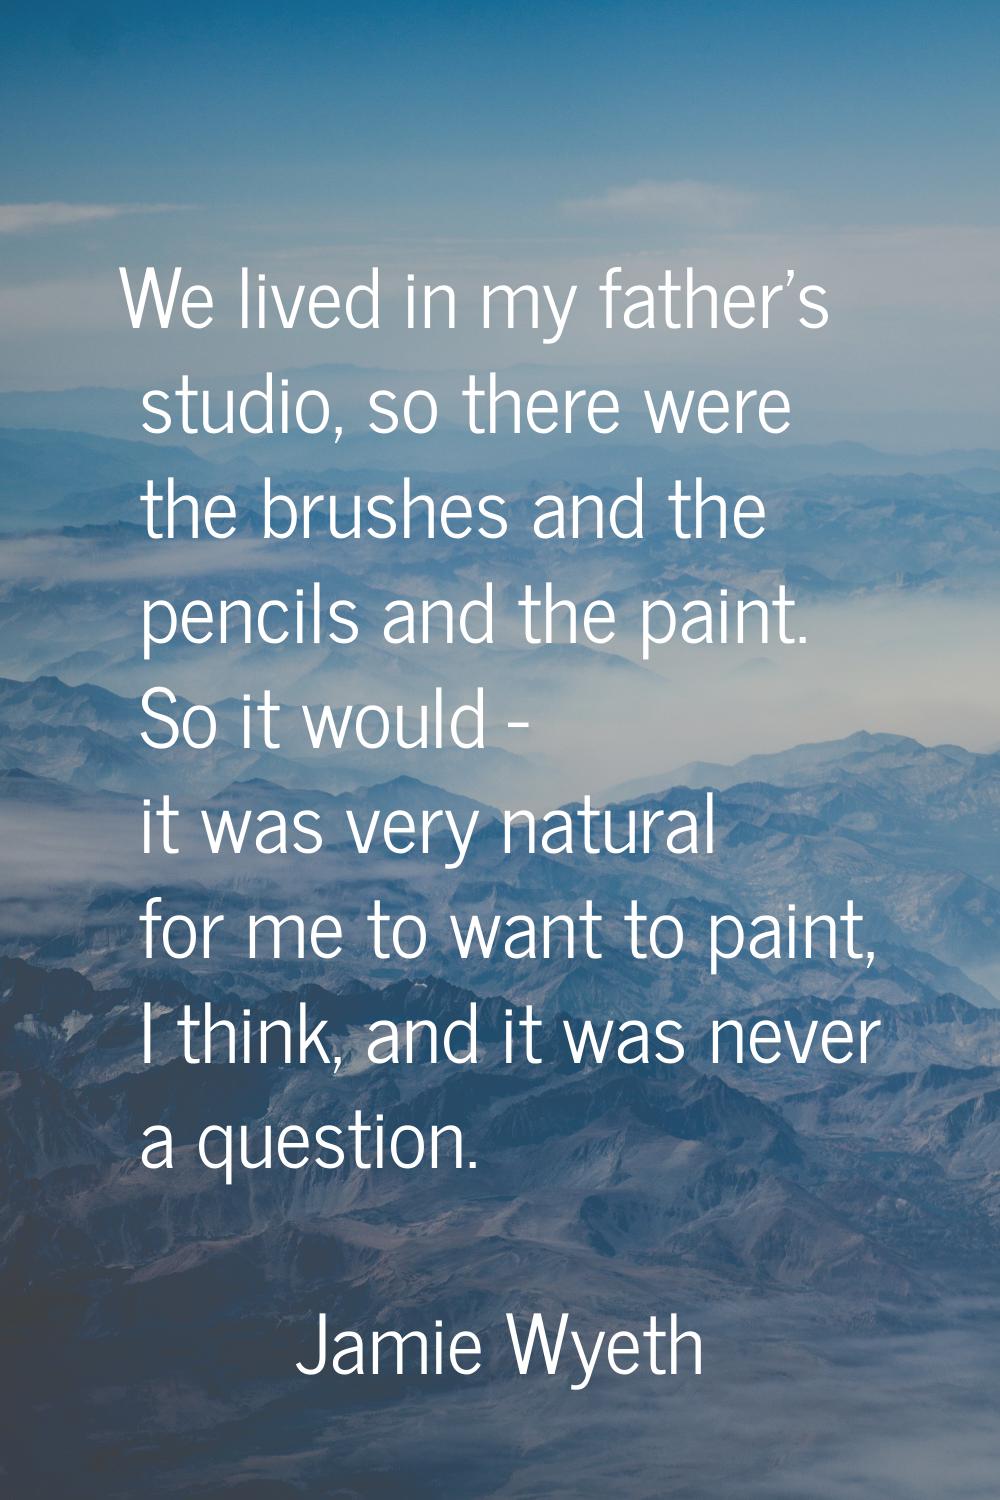 We lived in my father's studio, so there were the brushes and the pencils and the paint. So it woul